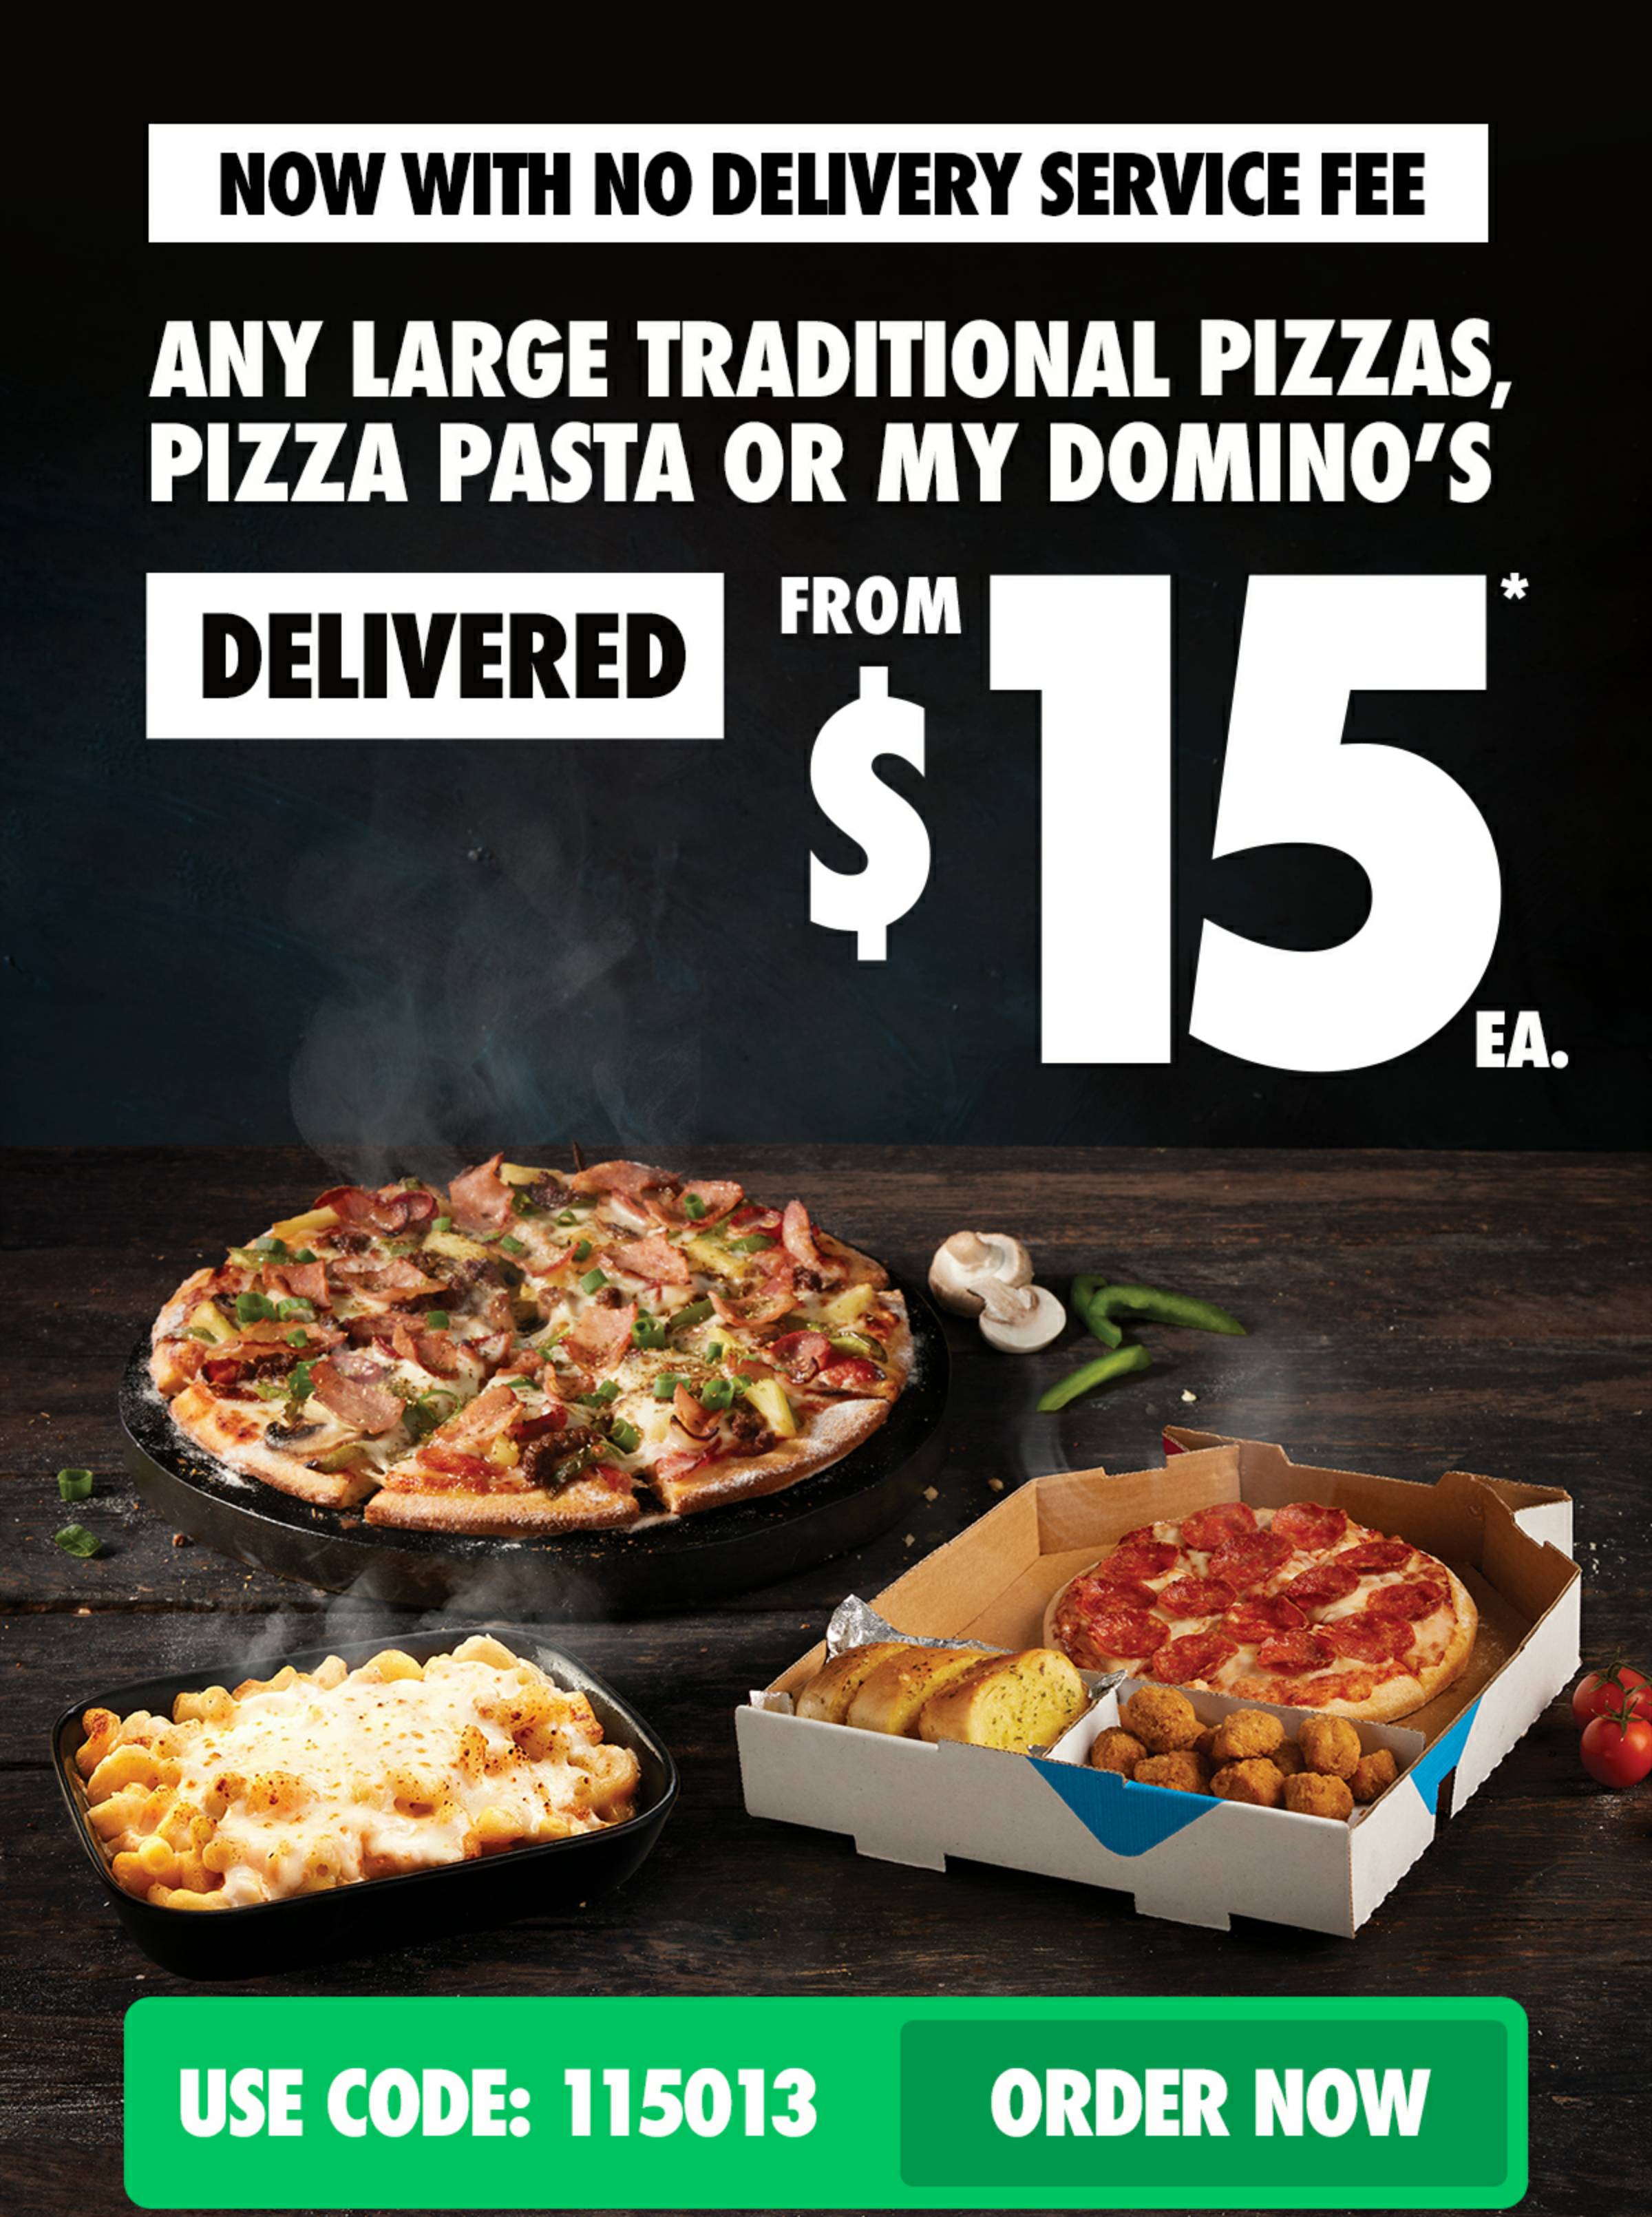 Domino's - Domino’s Large Traditional Pizza, Pizza Pasta, or My Domino’s $15 Delivered!